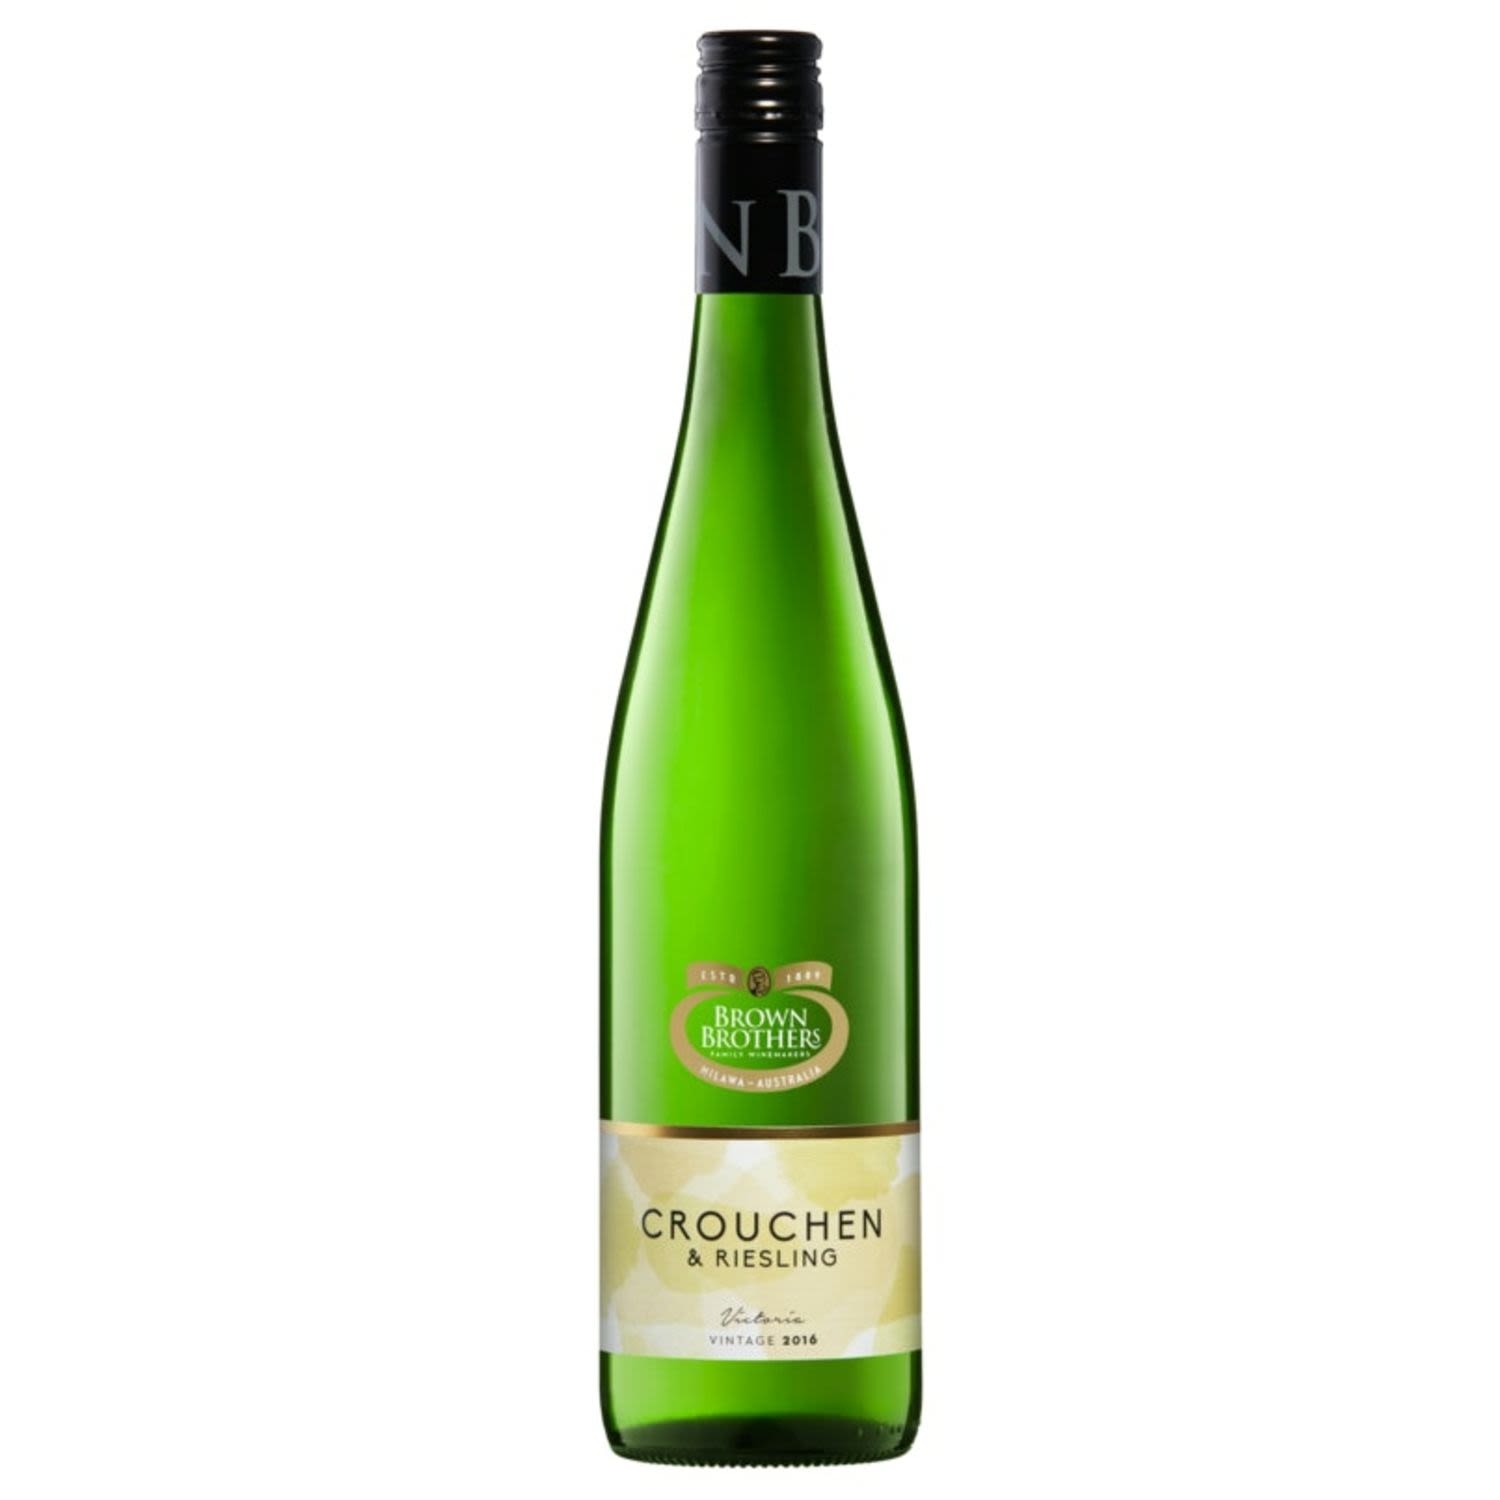 A wine of flavour and body with enticing hints of ripe melon and a delicate finish to which riesling adds length of flavour and a distinctive stamp of elegance. This wine should be served well chilled and enjoyed when young and fresh.<br /> <br />Alcohol Volume: 10.50%<br /><br />Pack Format: Bottle<br /><br />Standard Drinks: 6.2</br /><br />Pack Type: Bottle<br /><br />Country of Origin: Australia<br /><br />Region: Victoria<br /><br />Vintage: '2019<br />